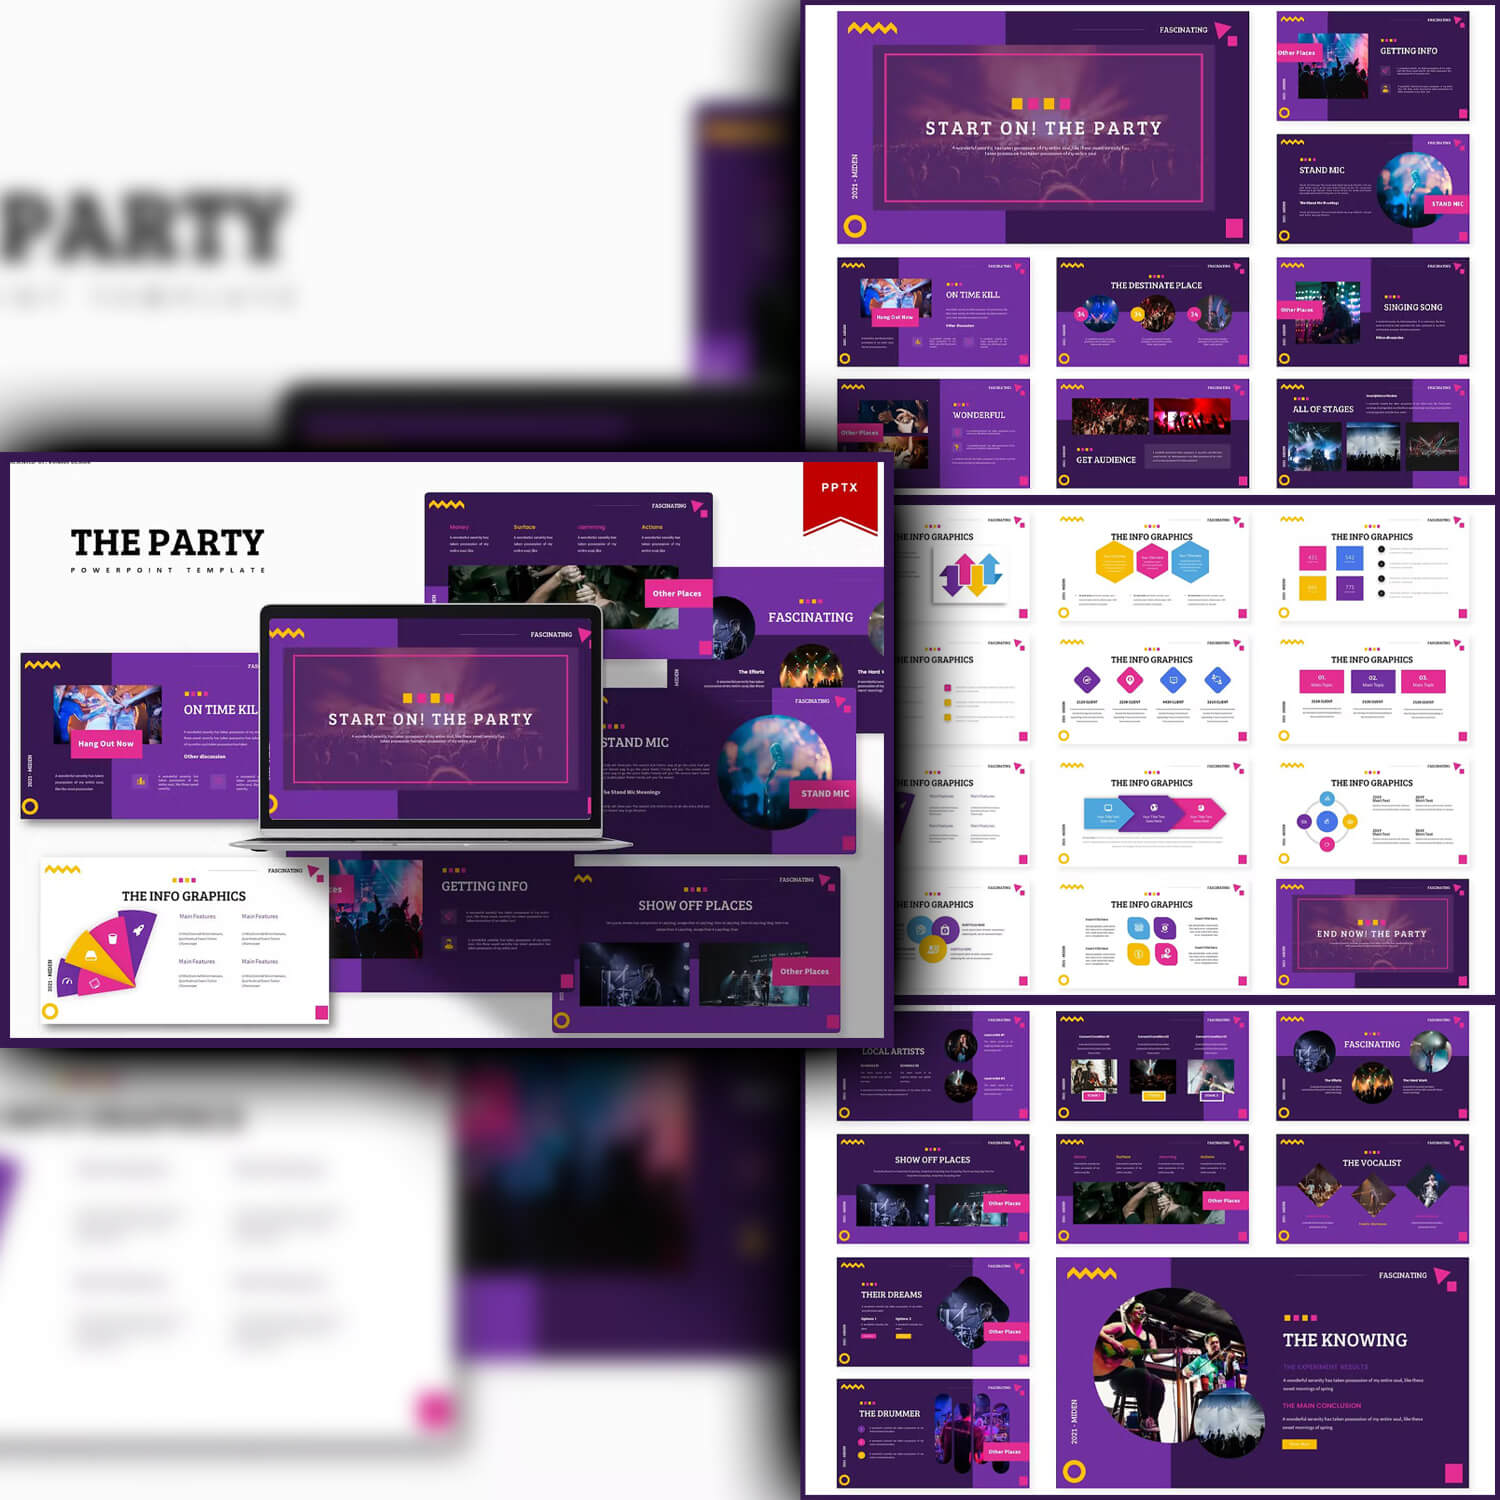 Slide "Show off places" of the party powerpoint template.